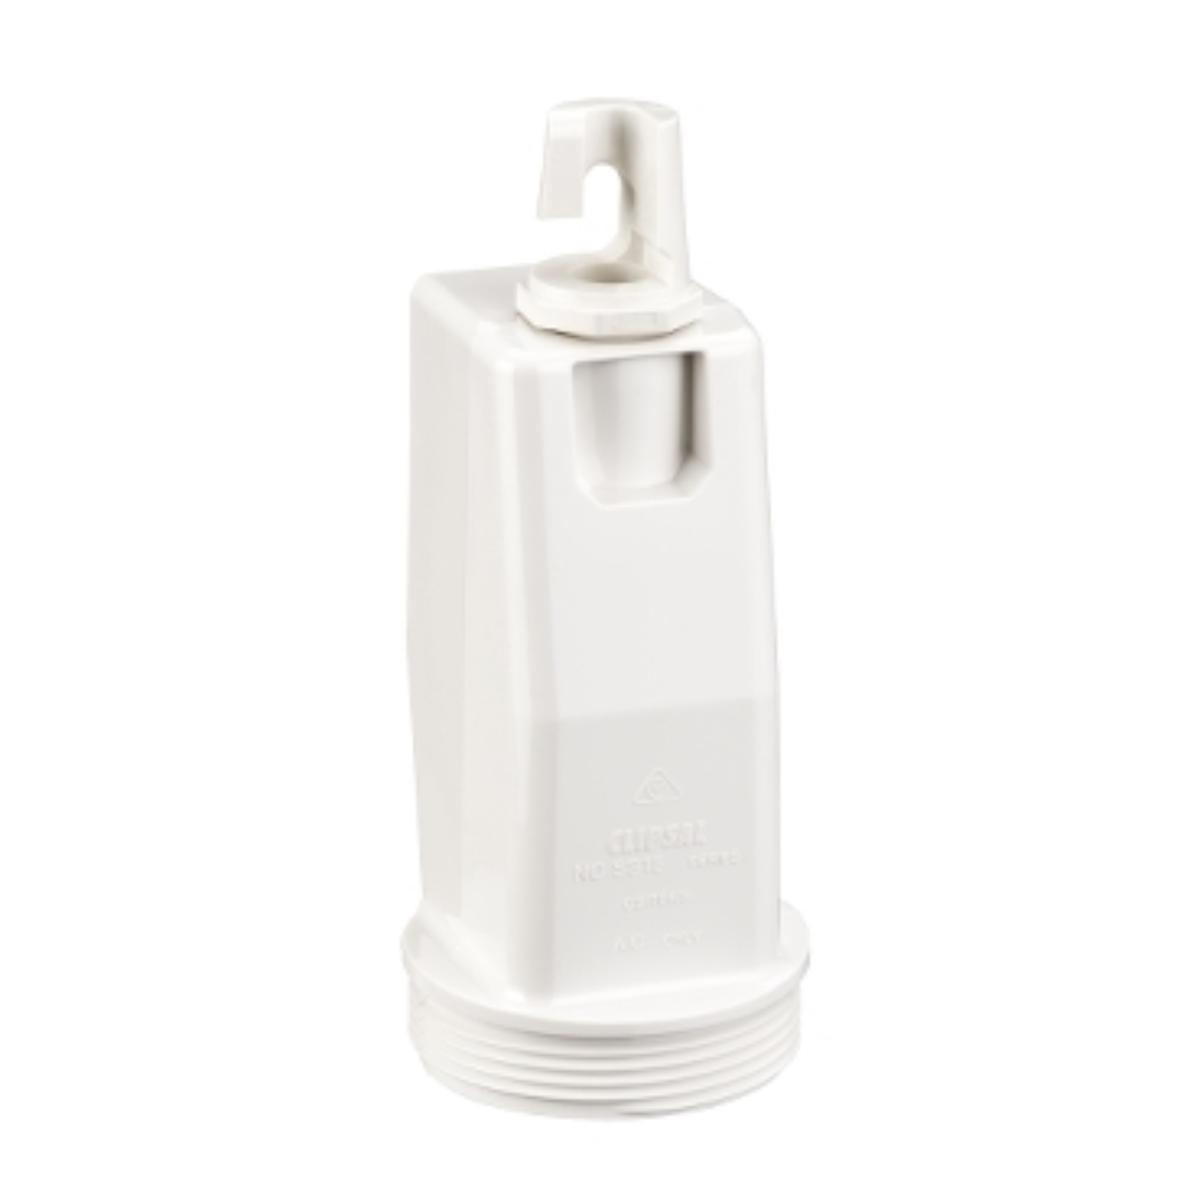 PENDANT OUTLET SWITCHED 10A 250V WHITE